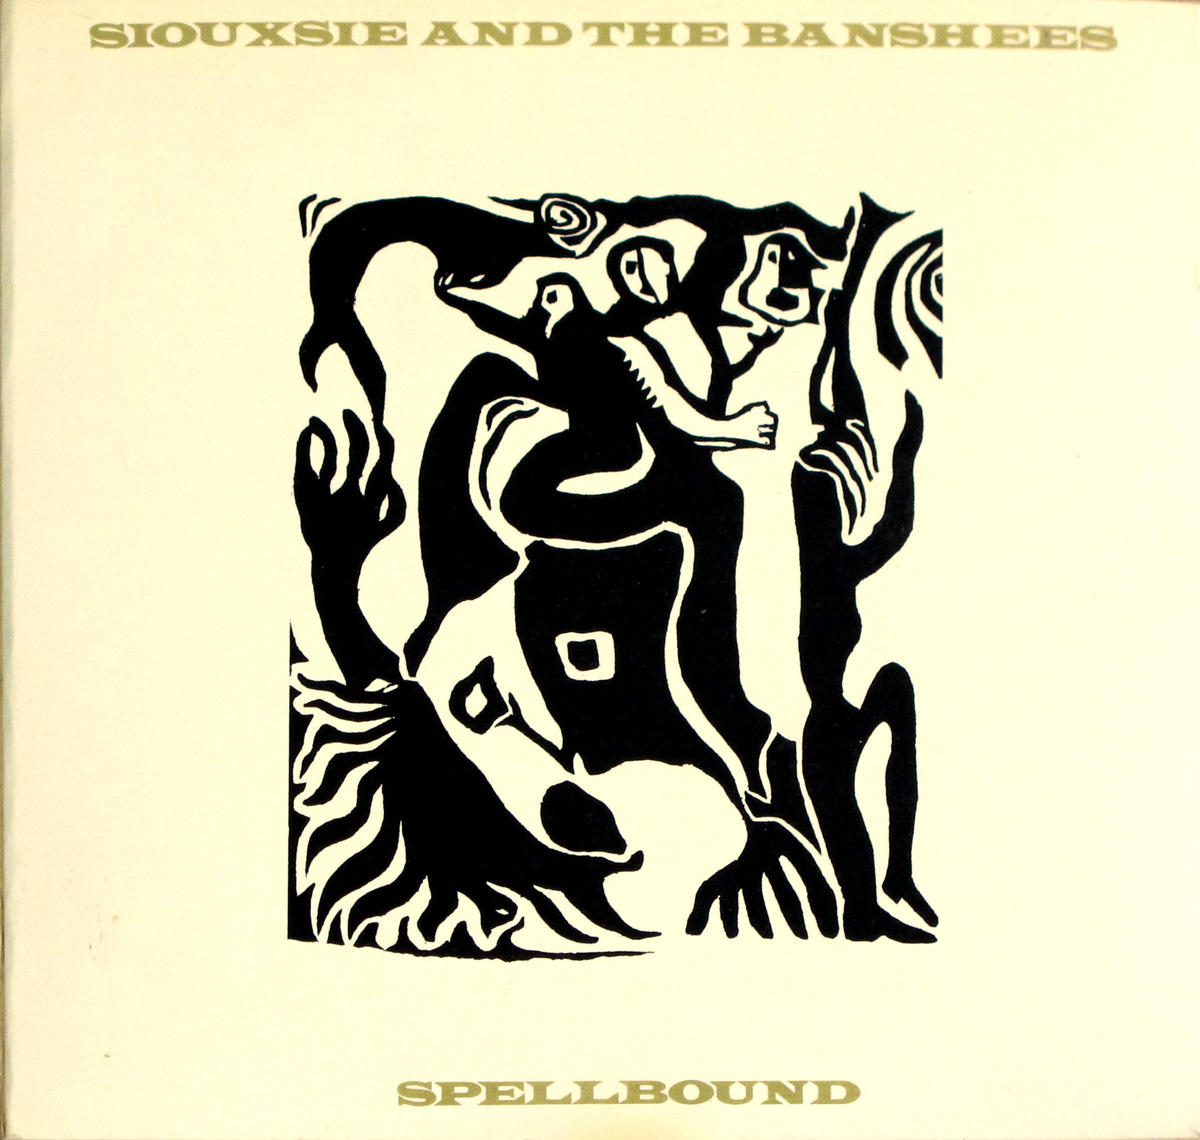 SIOUXSIE & THE BANSHEES SPELLBOUND 7" 45RPM PS SINGLE VINYL